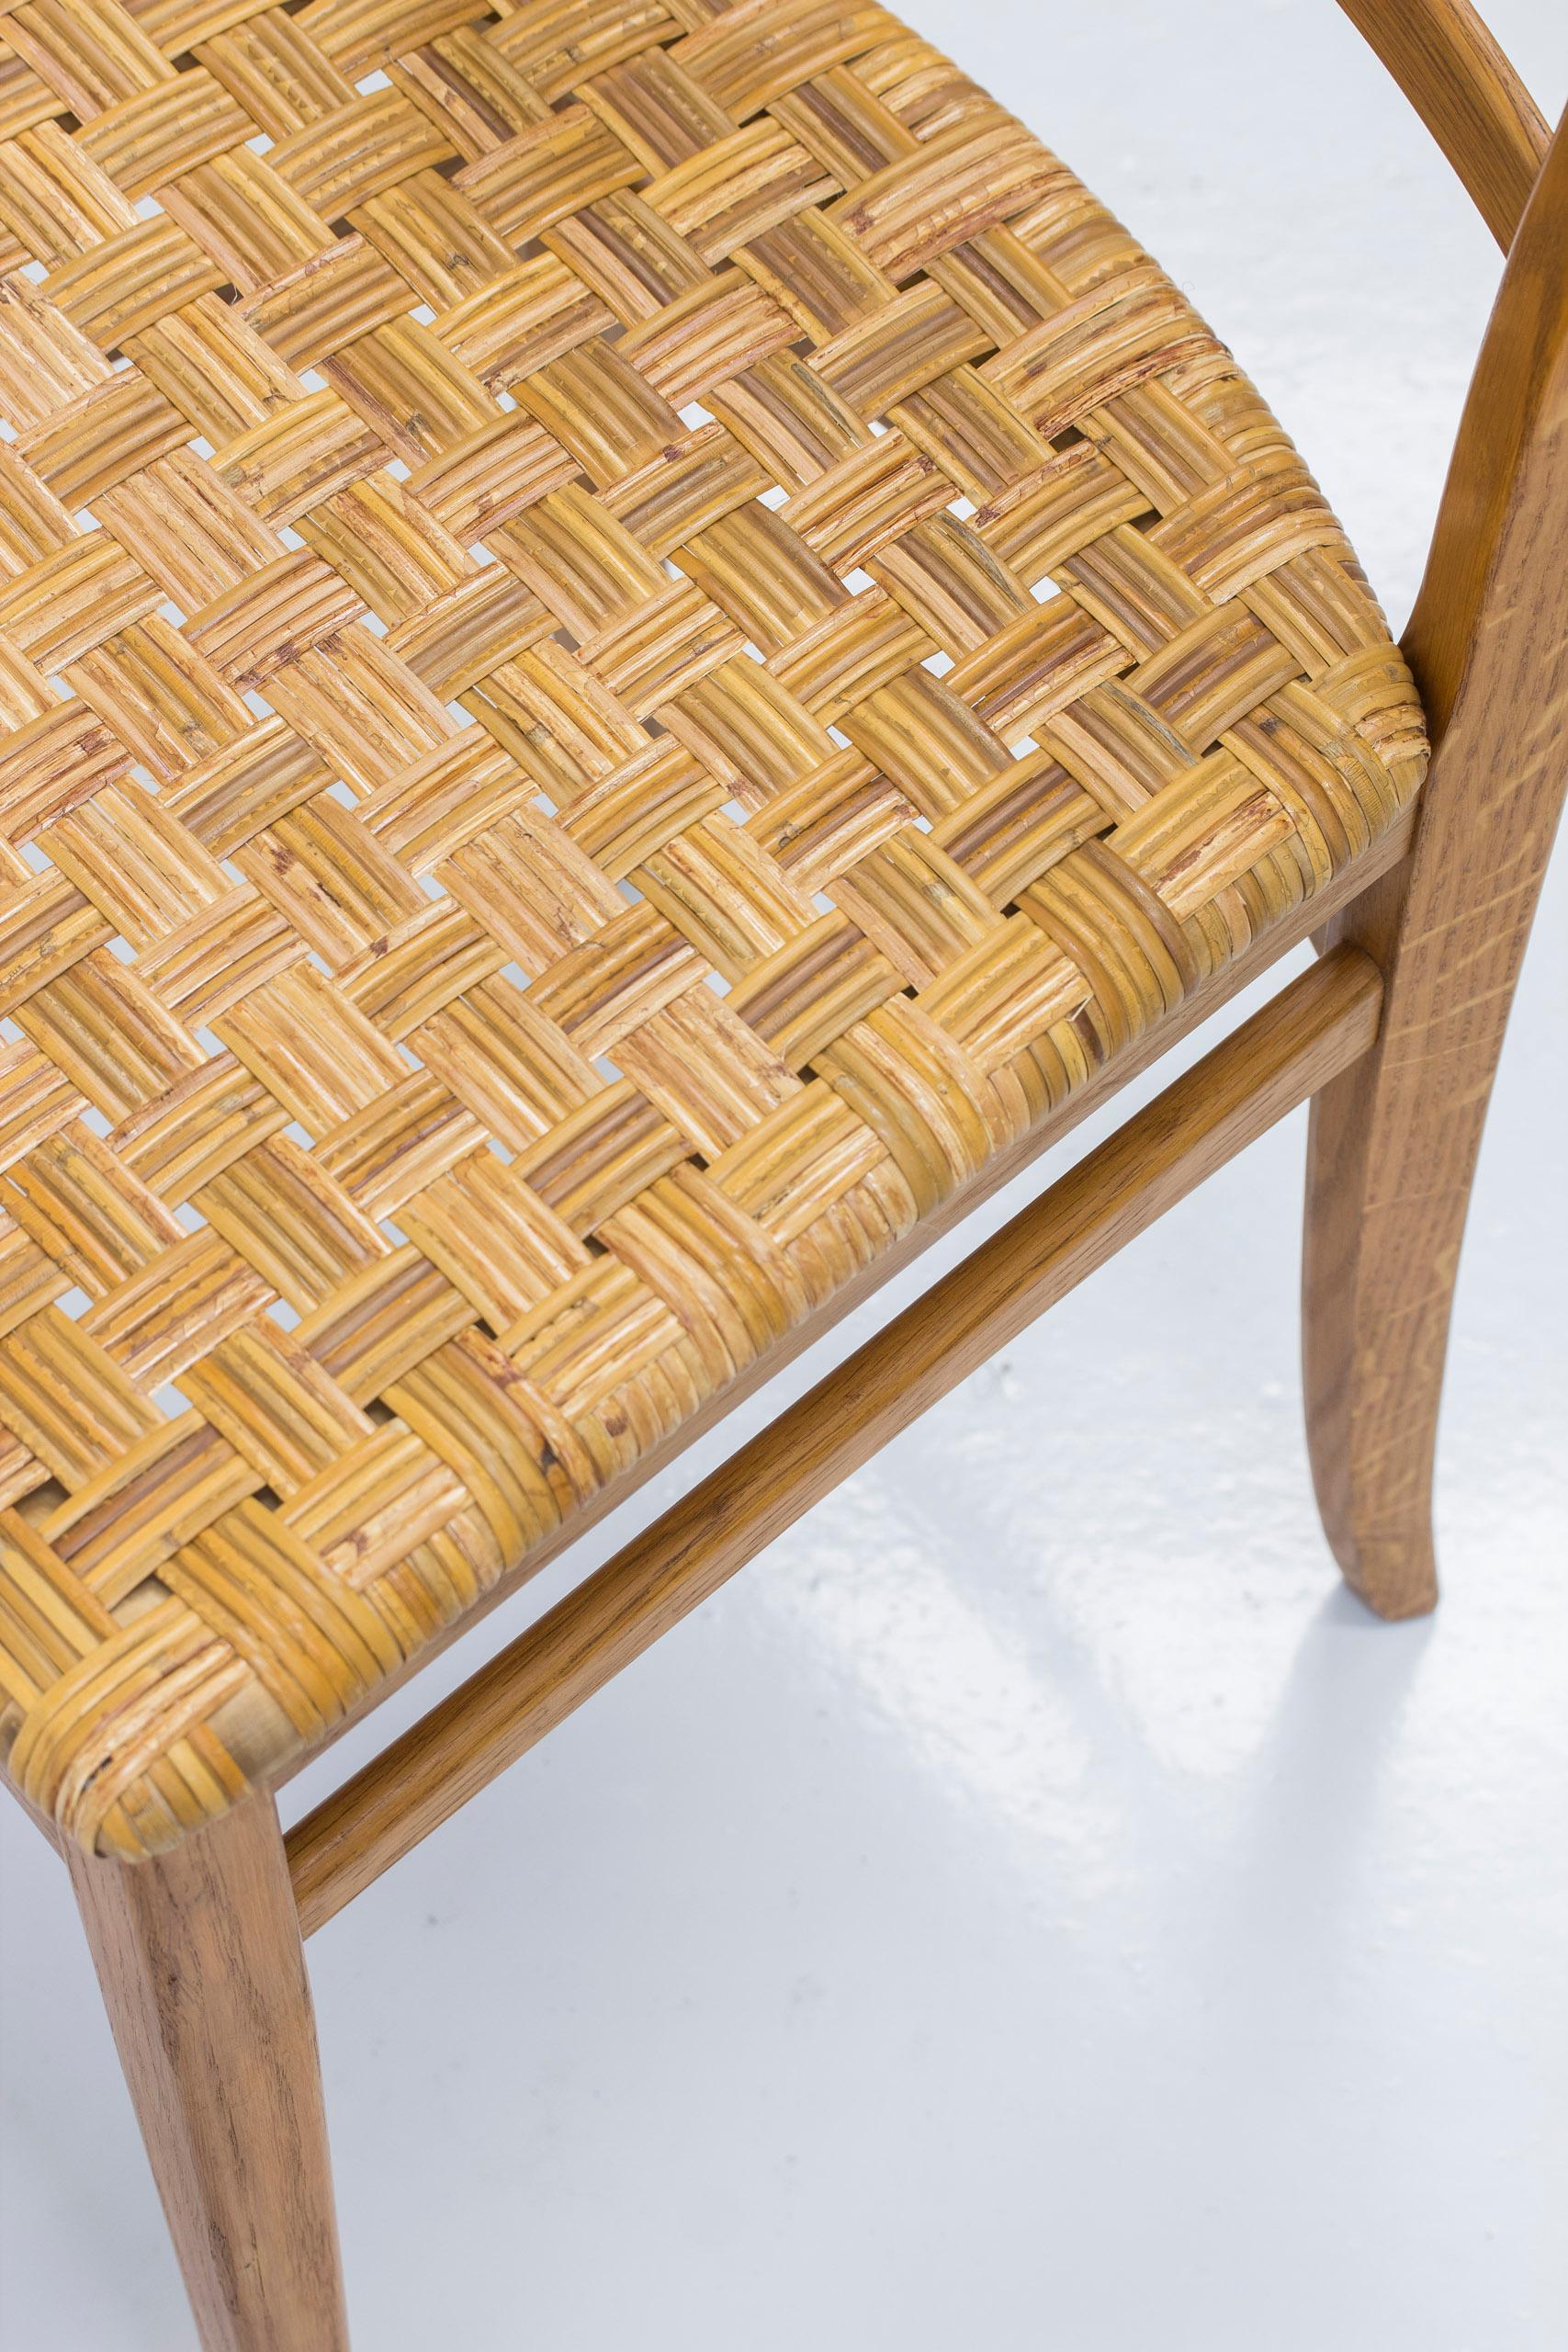 Oak and Cane Weave Dining Chairs by Carl Malmsten, Swedish Modern, 1950s For Sale 2